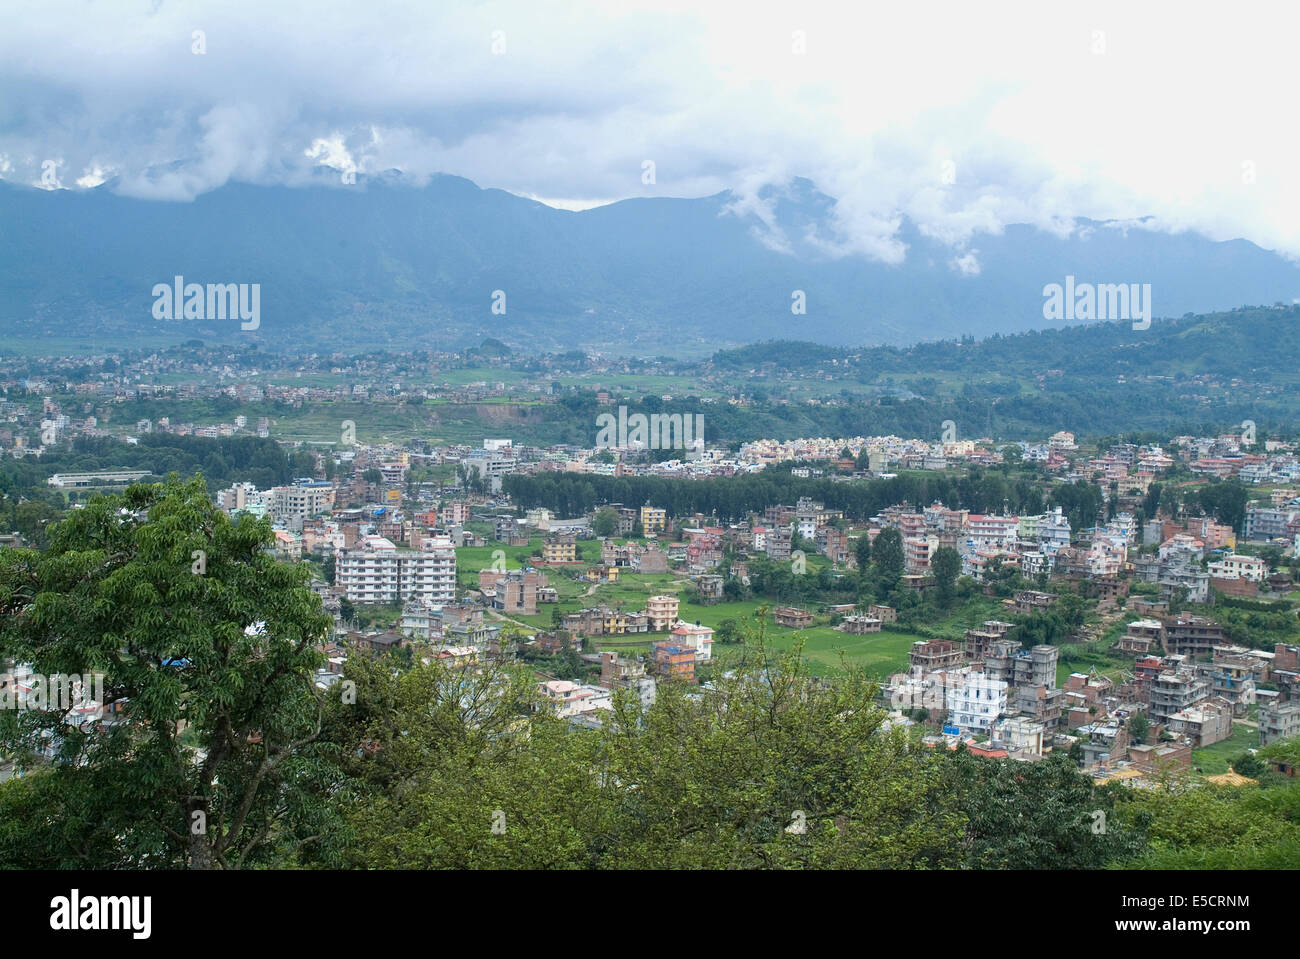 View over the city and valley of Kathmandu, Nepal Stock Photo